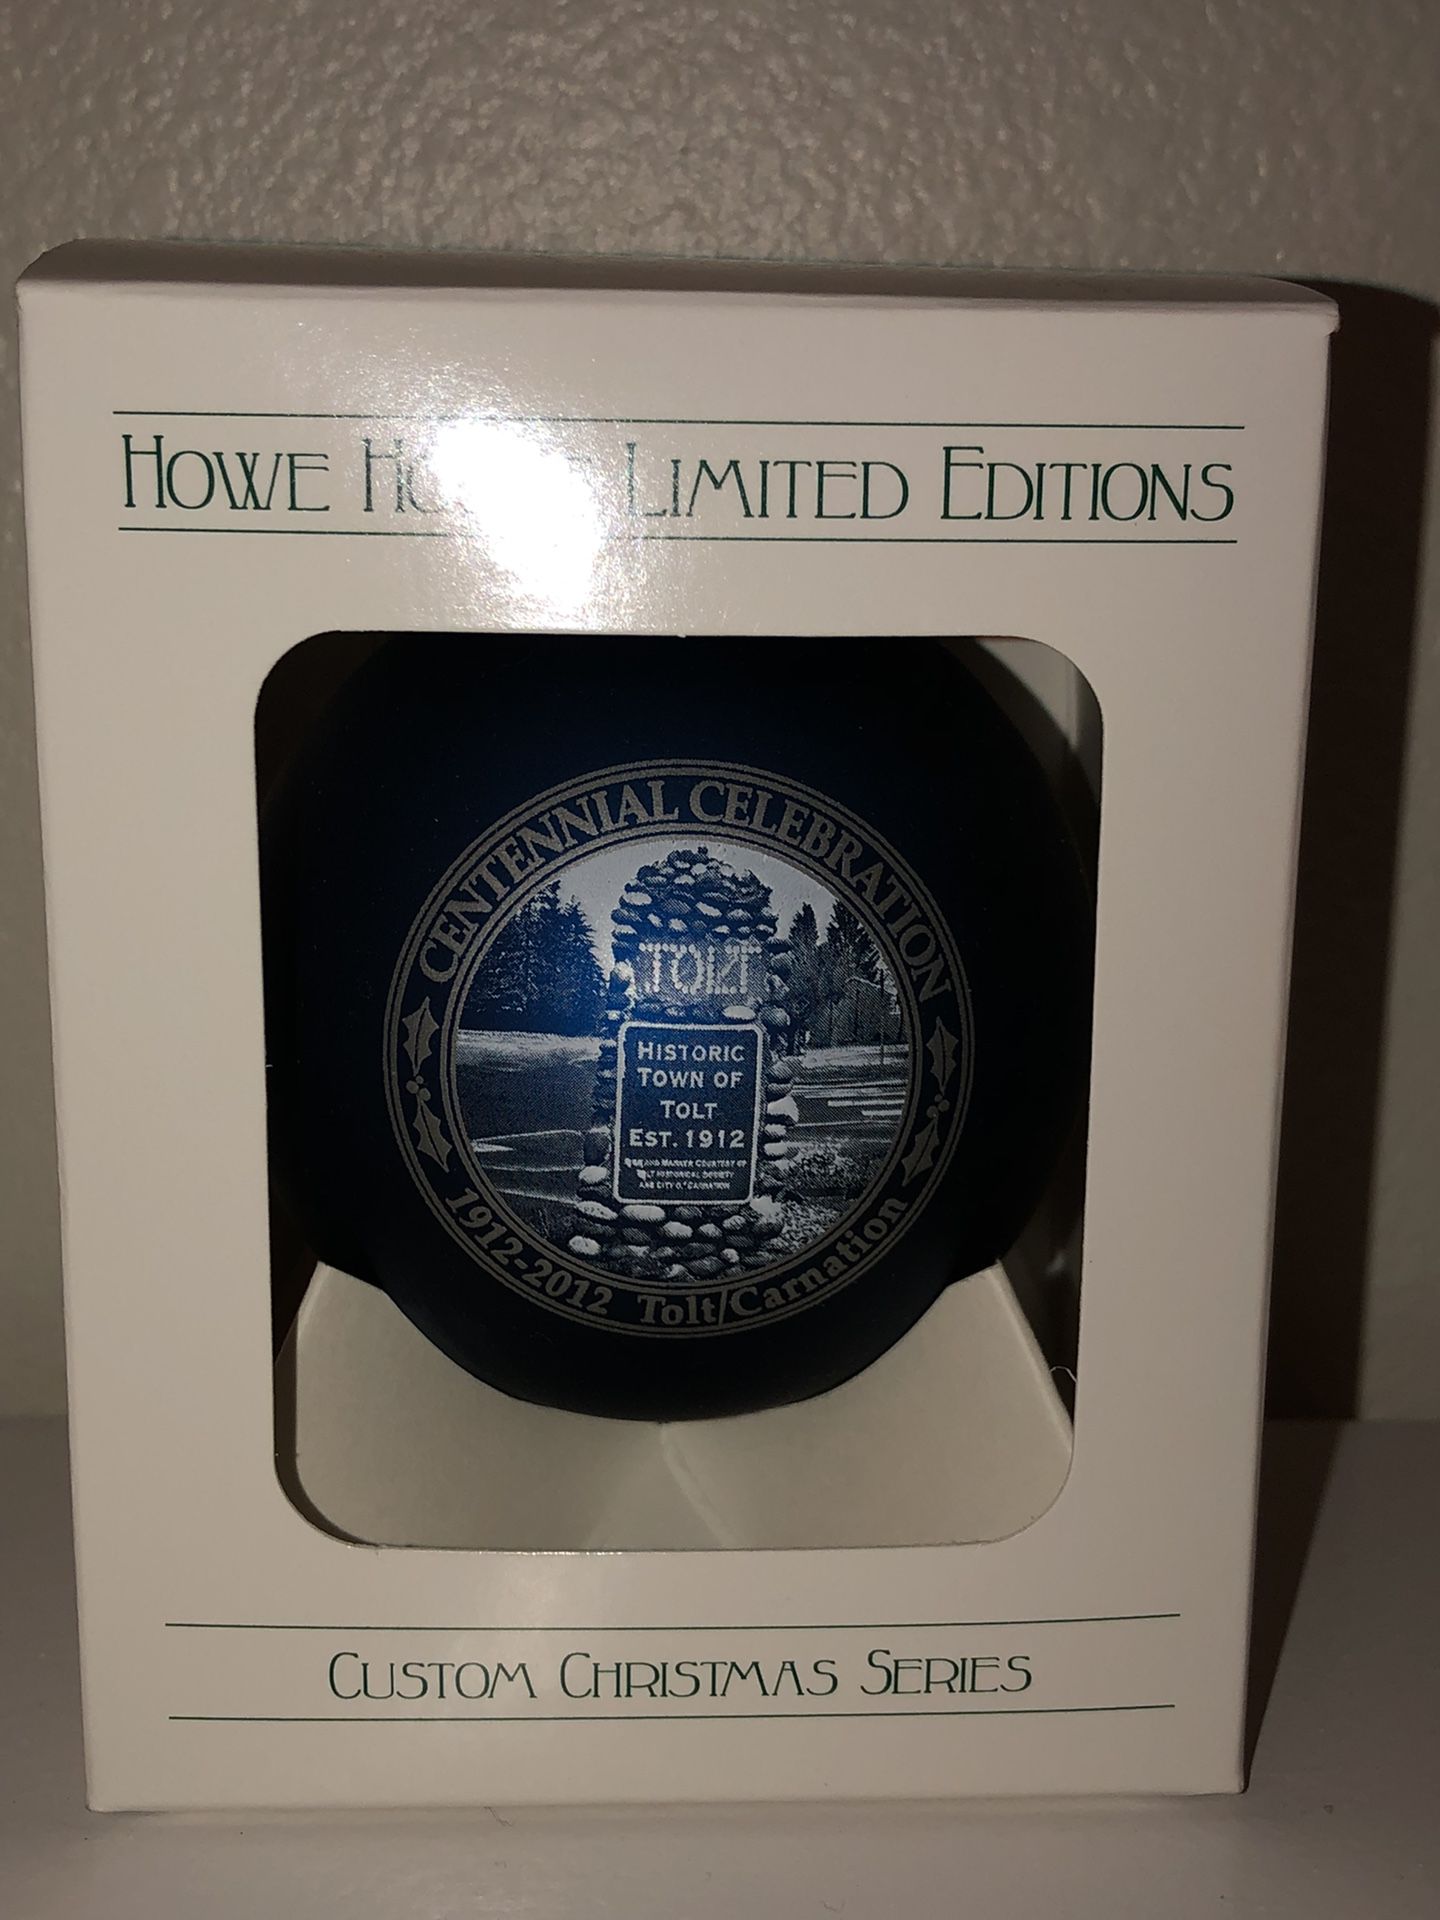 Historic Town of Tolt Centennial Celebration Ornament 1(contact info removed)